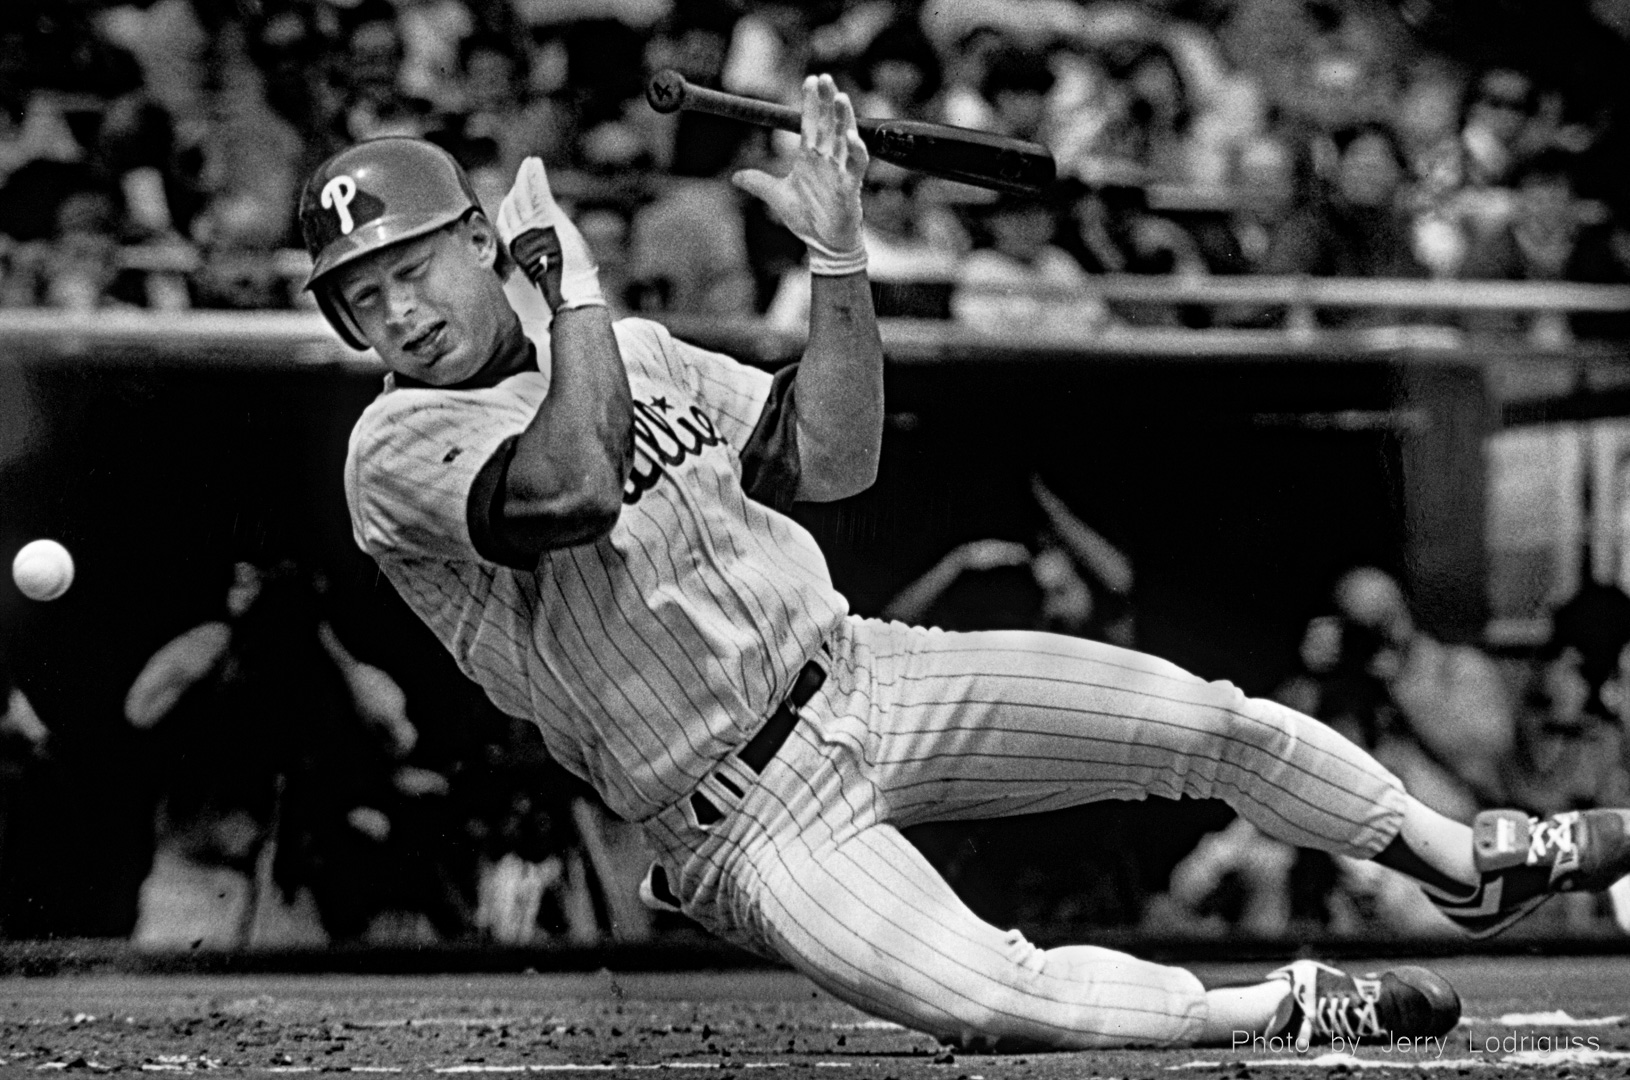 Phillies' lead off hitter Lenny Dykstra goes down after being hit by the second pitch in the game in his first at bat on opening day in 1992. Dykstra sustained a broken bone in his wrist on the pitch by the Atlanta Braves' Greg Maddux.